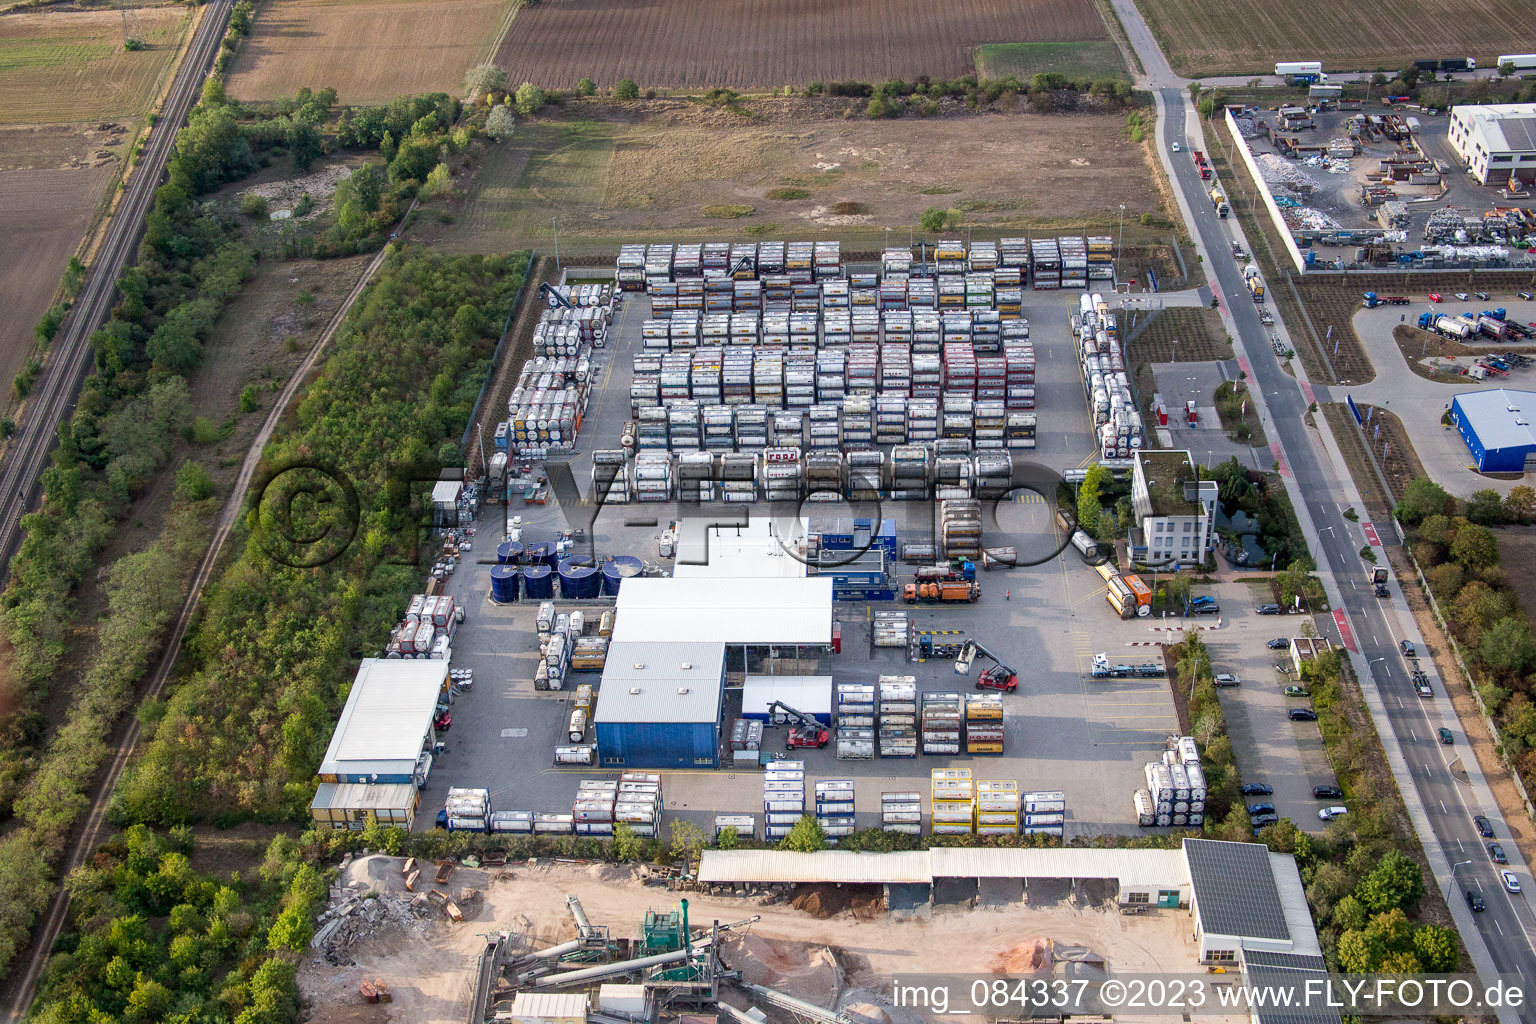 Warehouses and forwarding building Kube & Kubenz in Worms in the state Rhineland-Palatinate, Germany out of the air